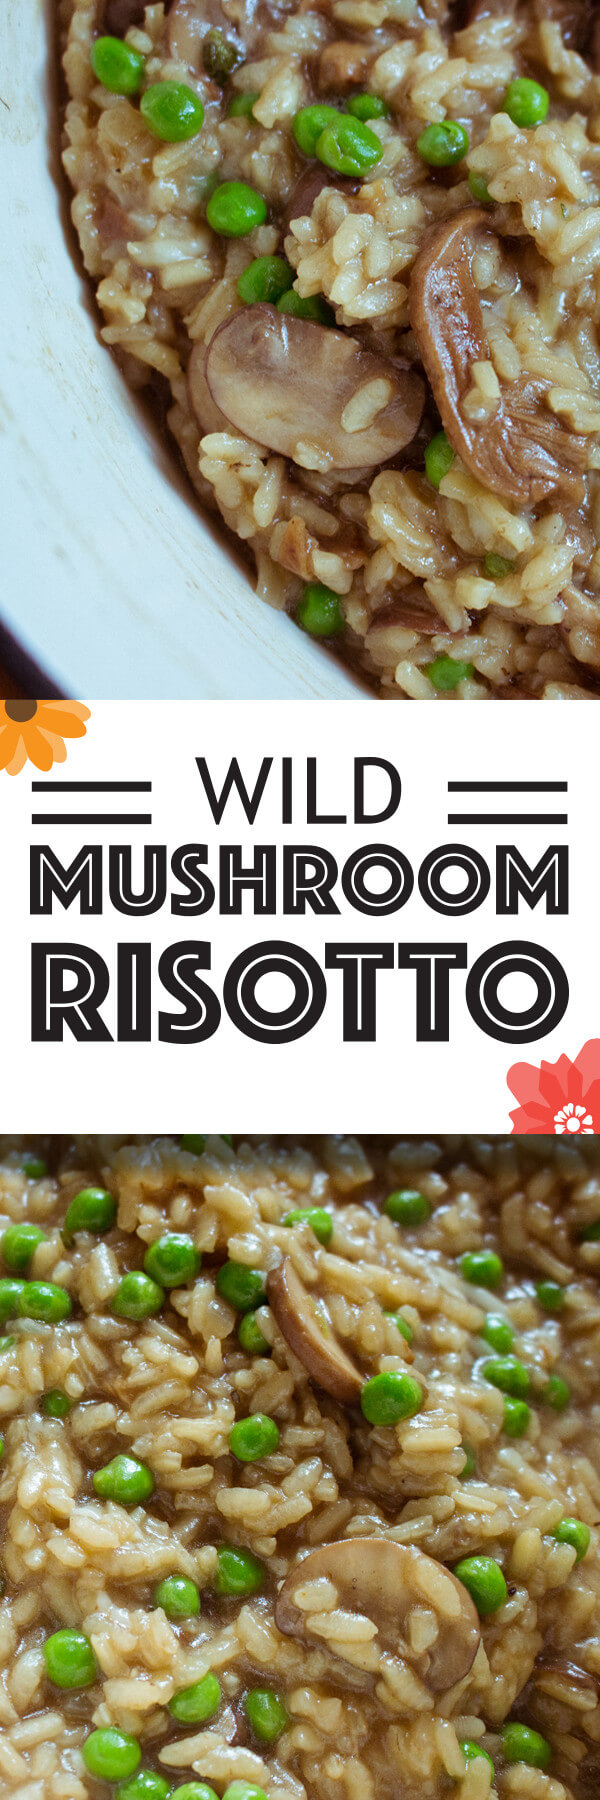 Nothing says risotto better than wild mushroom risotto